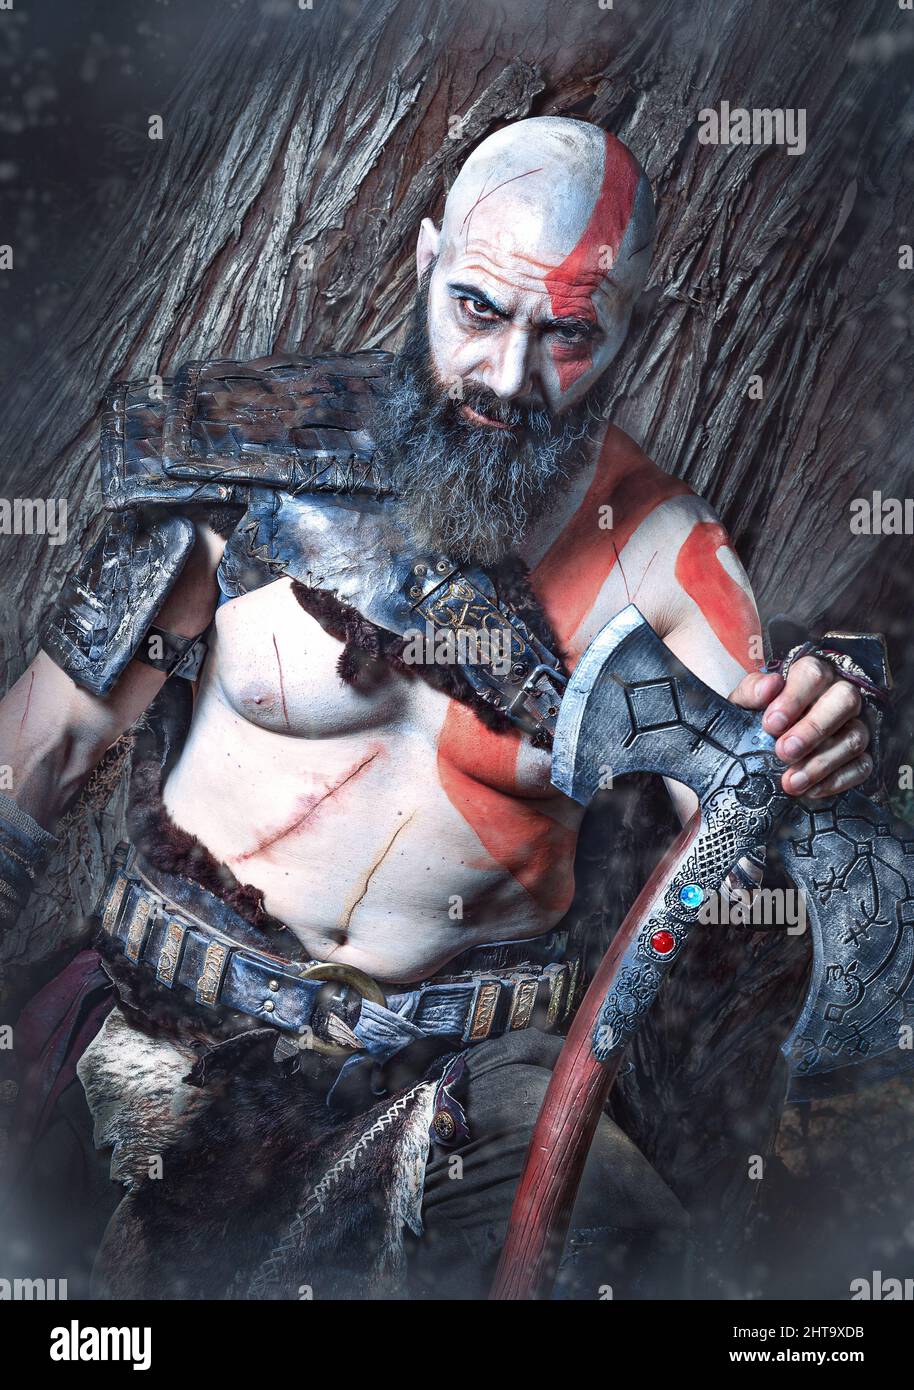 WARRIOR IN THE FOREST. CHARACTERIZATION. COSTUME PLAY. COSPLAY. Stock Photo